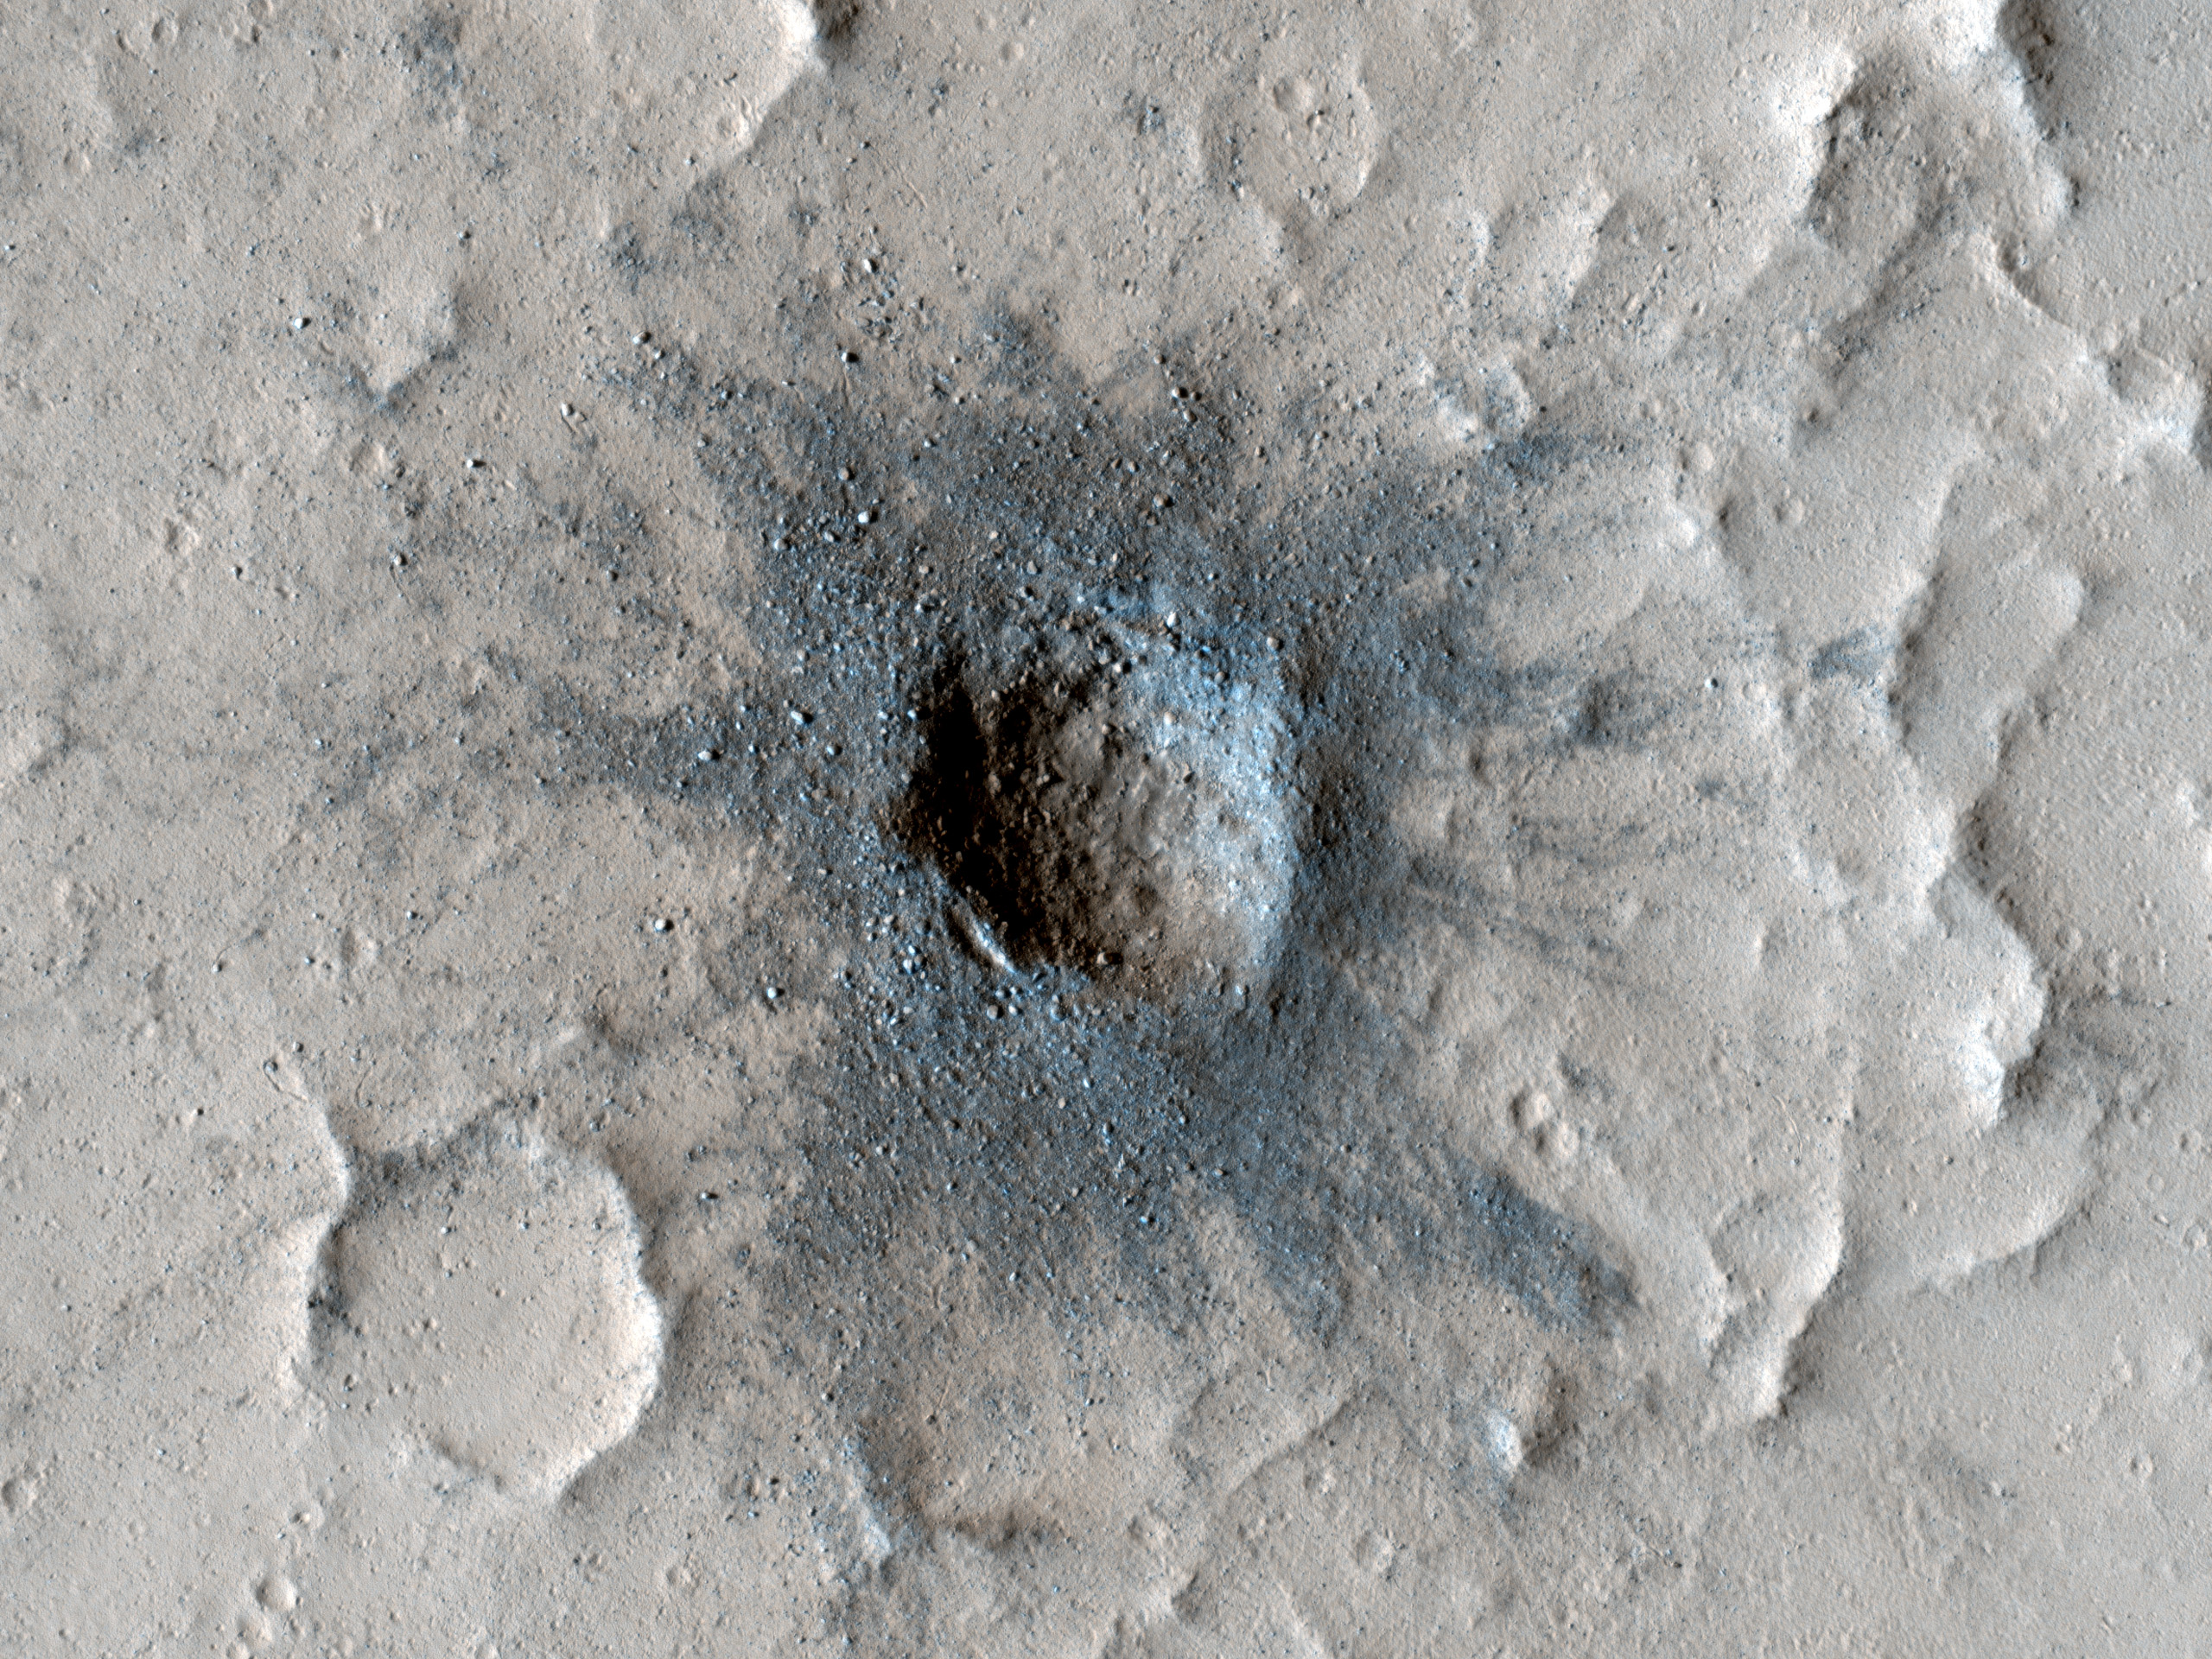 Slow Changes at an Old Impact Crater